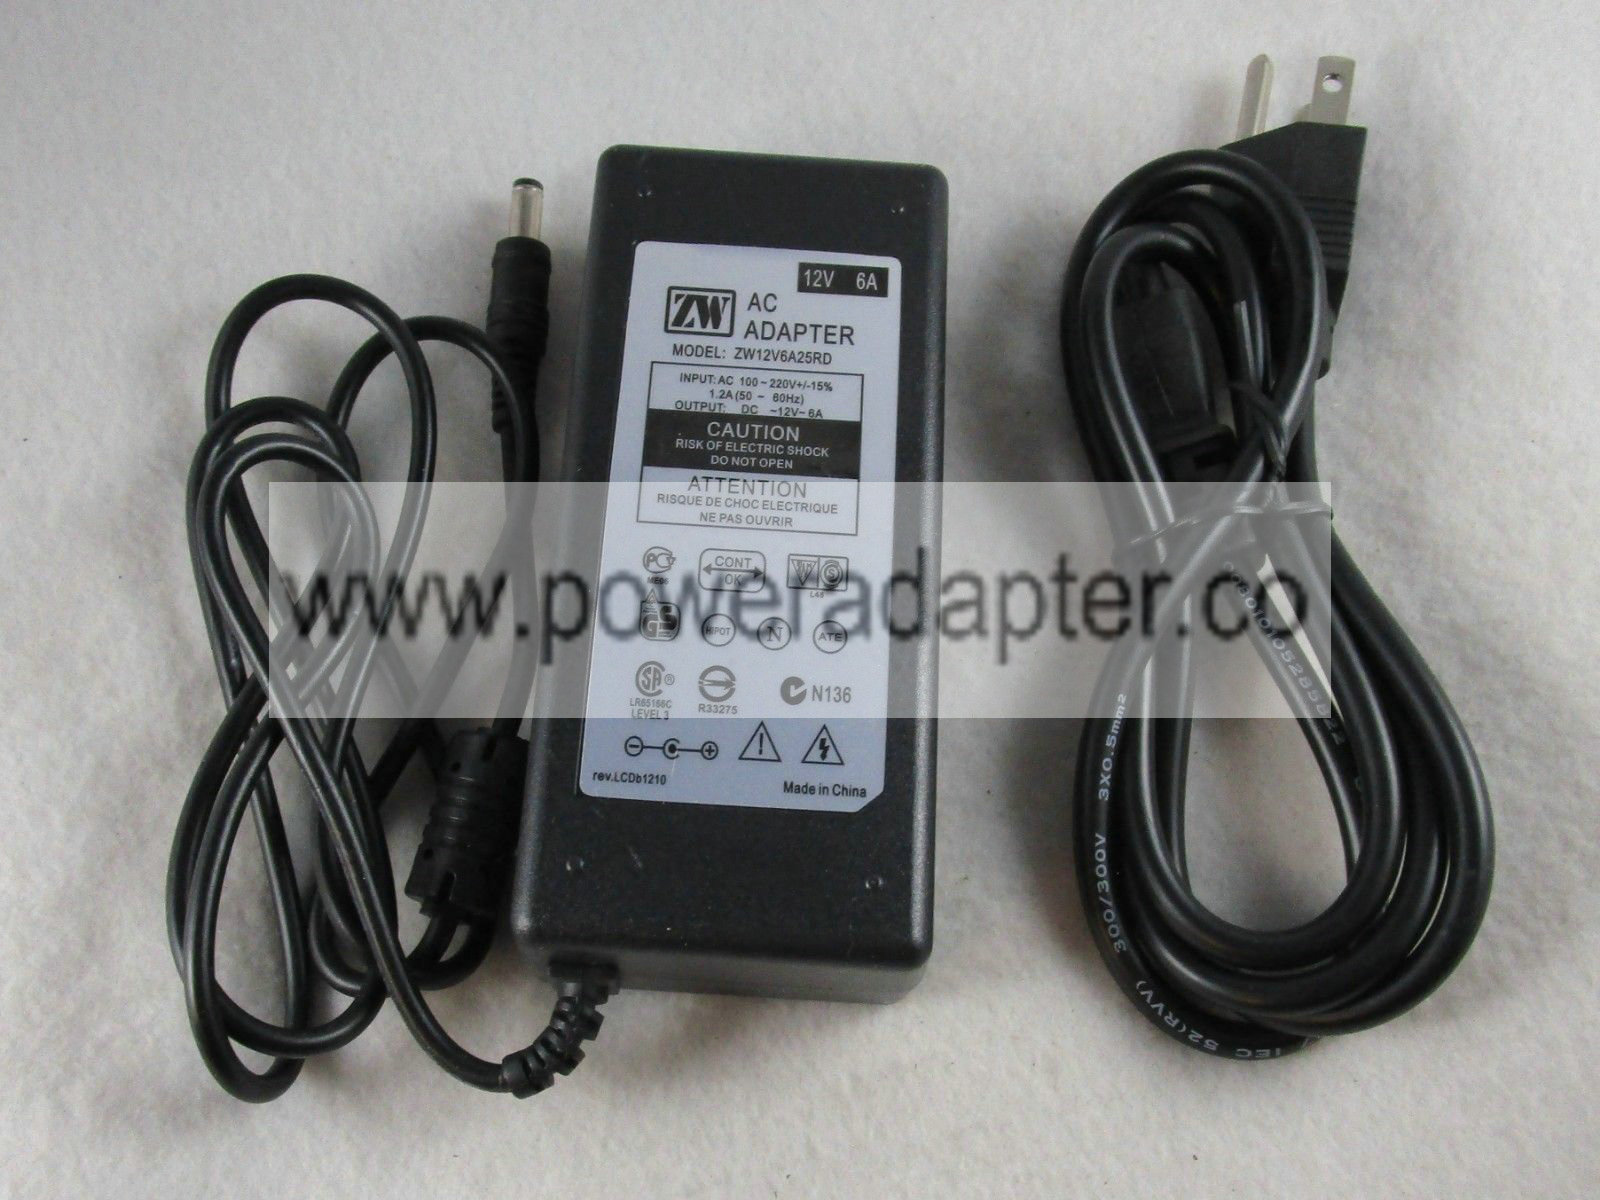 ZW 72W AC Power Adapter New in bulk packaging. Includes 3 prong power cord. Make offer is for qty 5 or more adapters.